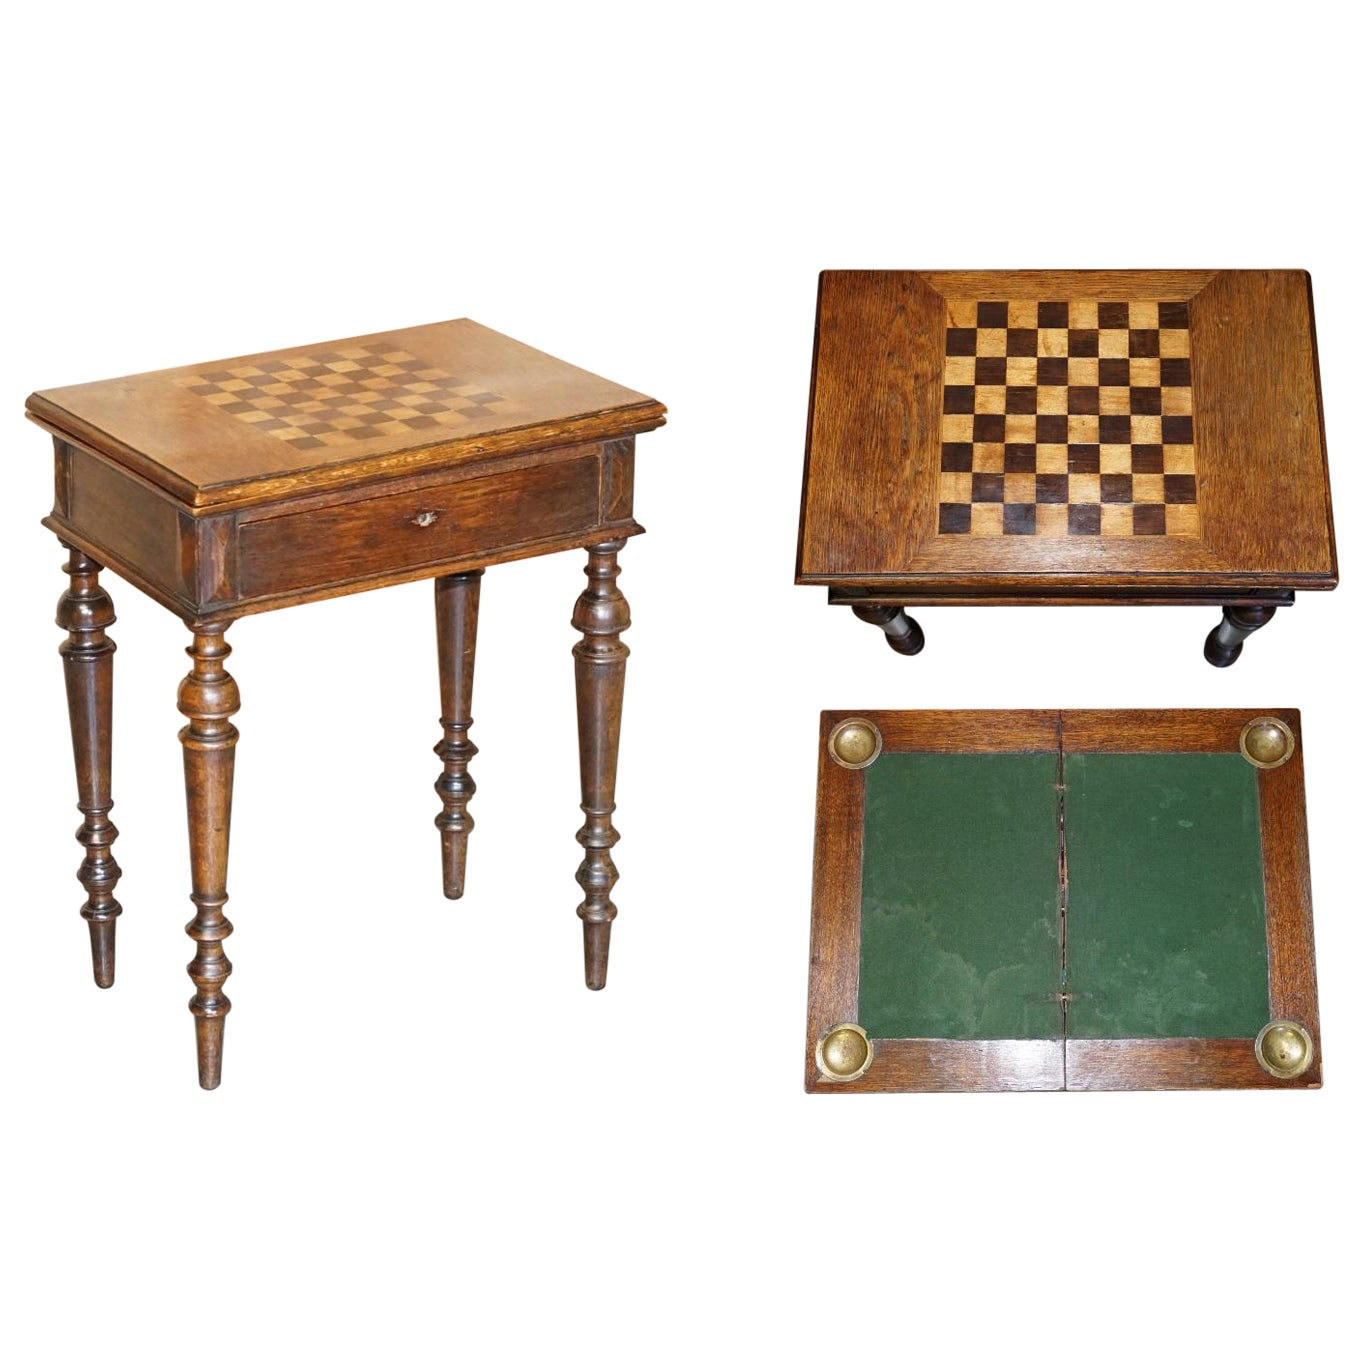 Lovely Antique Victrian circa 1880 Chess Games Table with Fold over Card Baize For Sale